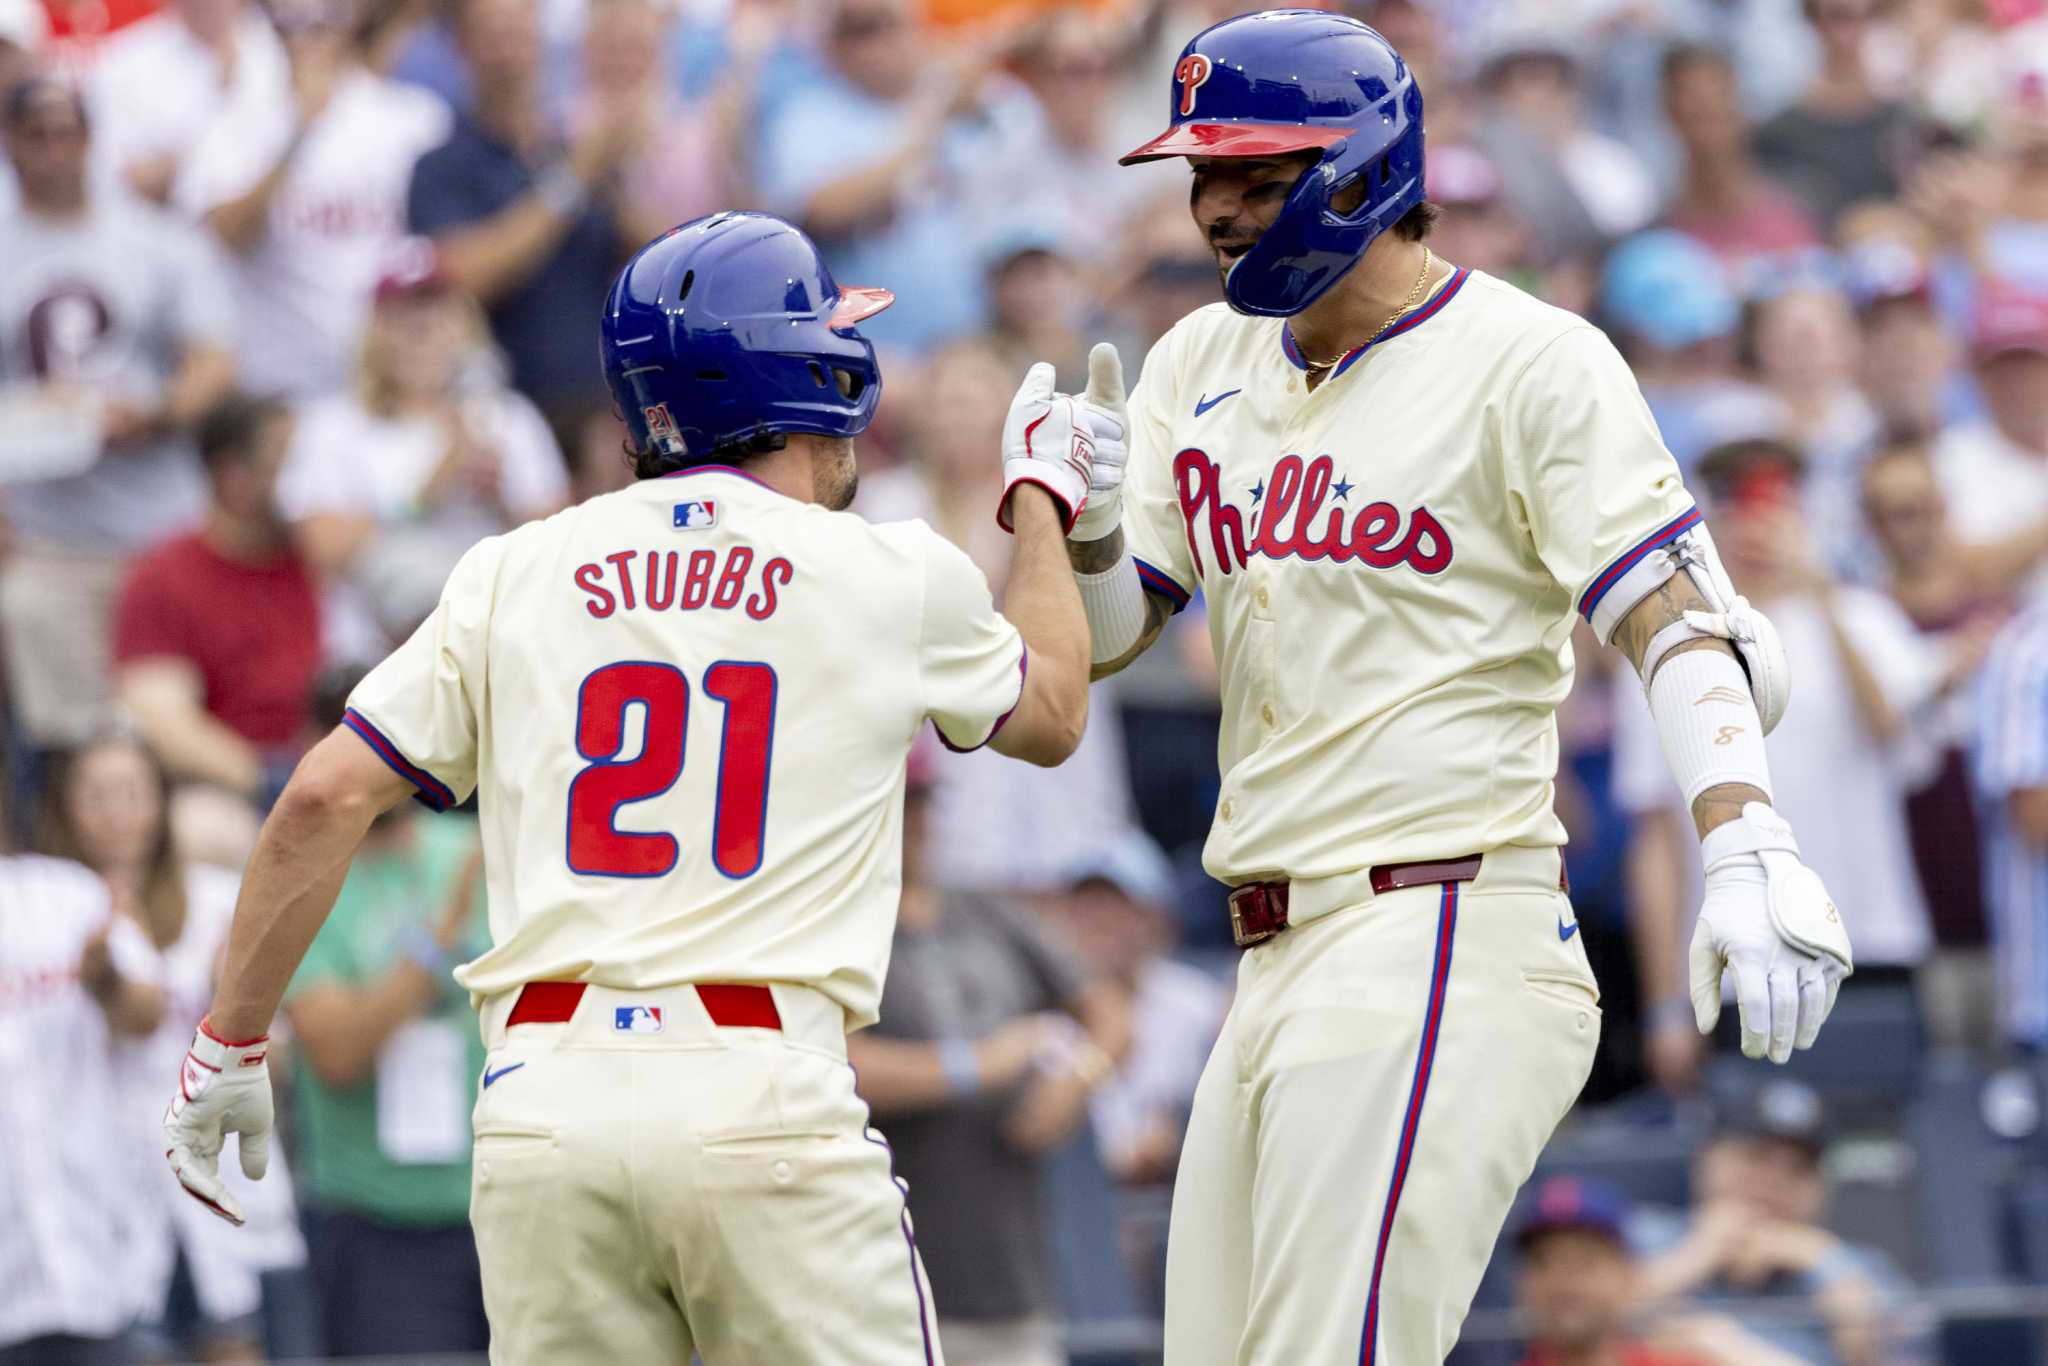 Phillies set to reign in London as best team in National League